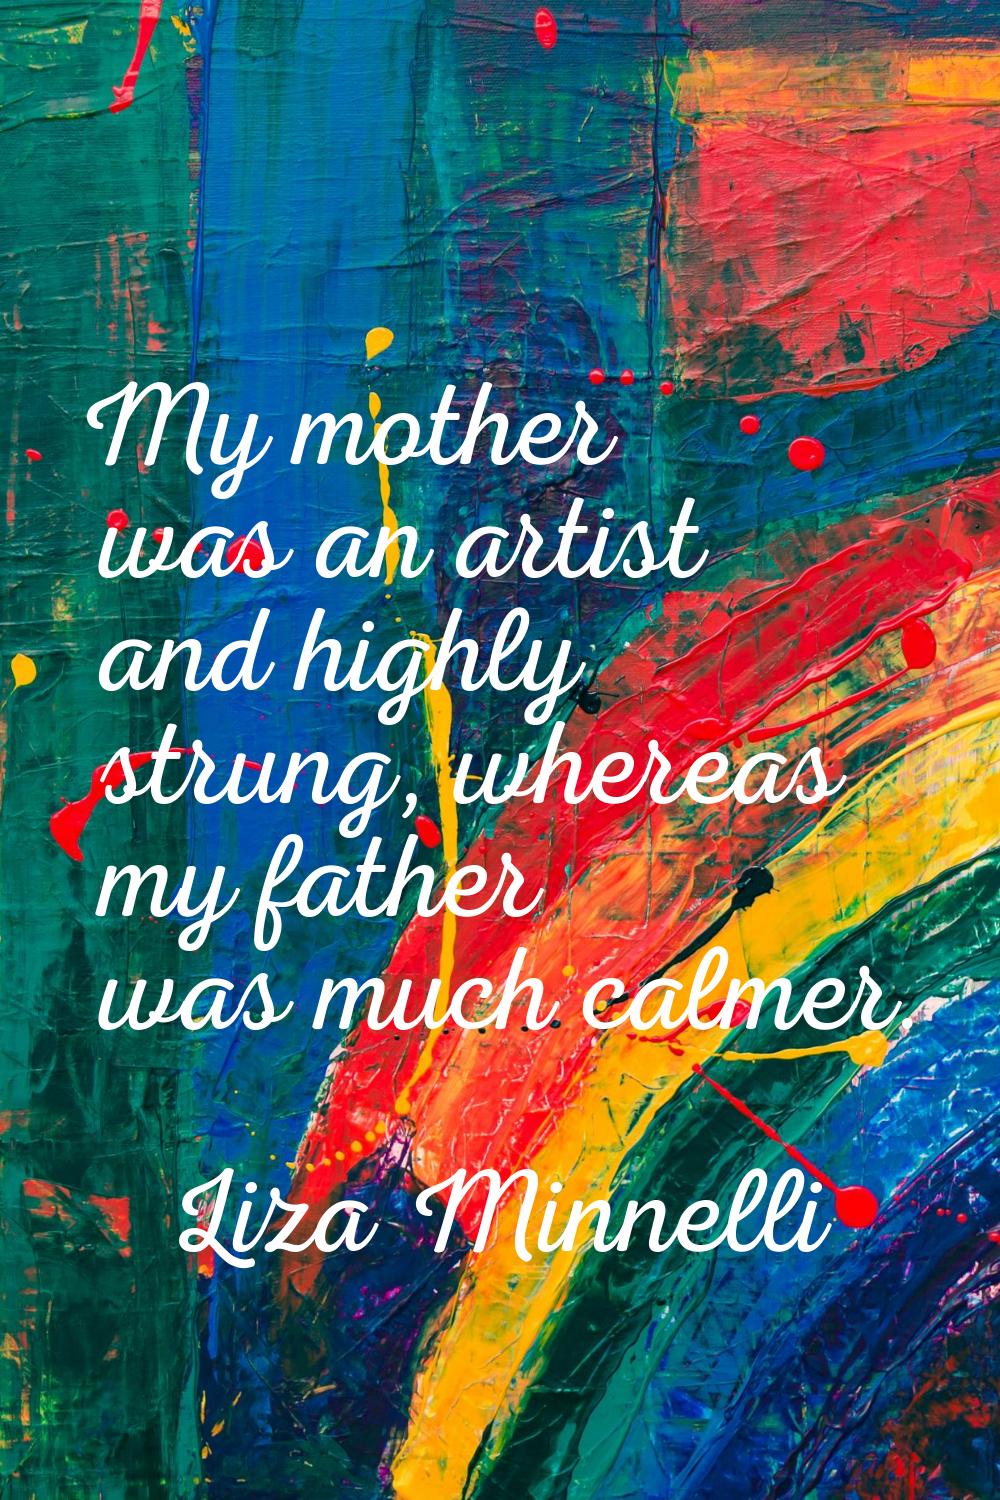 My mother was an artist and highly strung, whereas my father was much calmer.